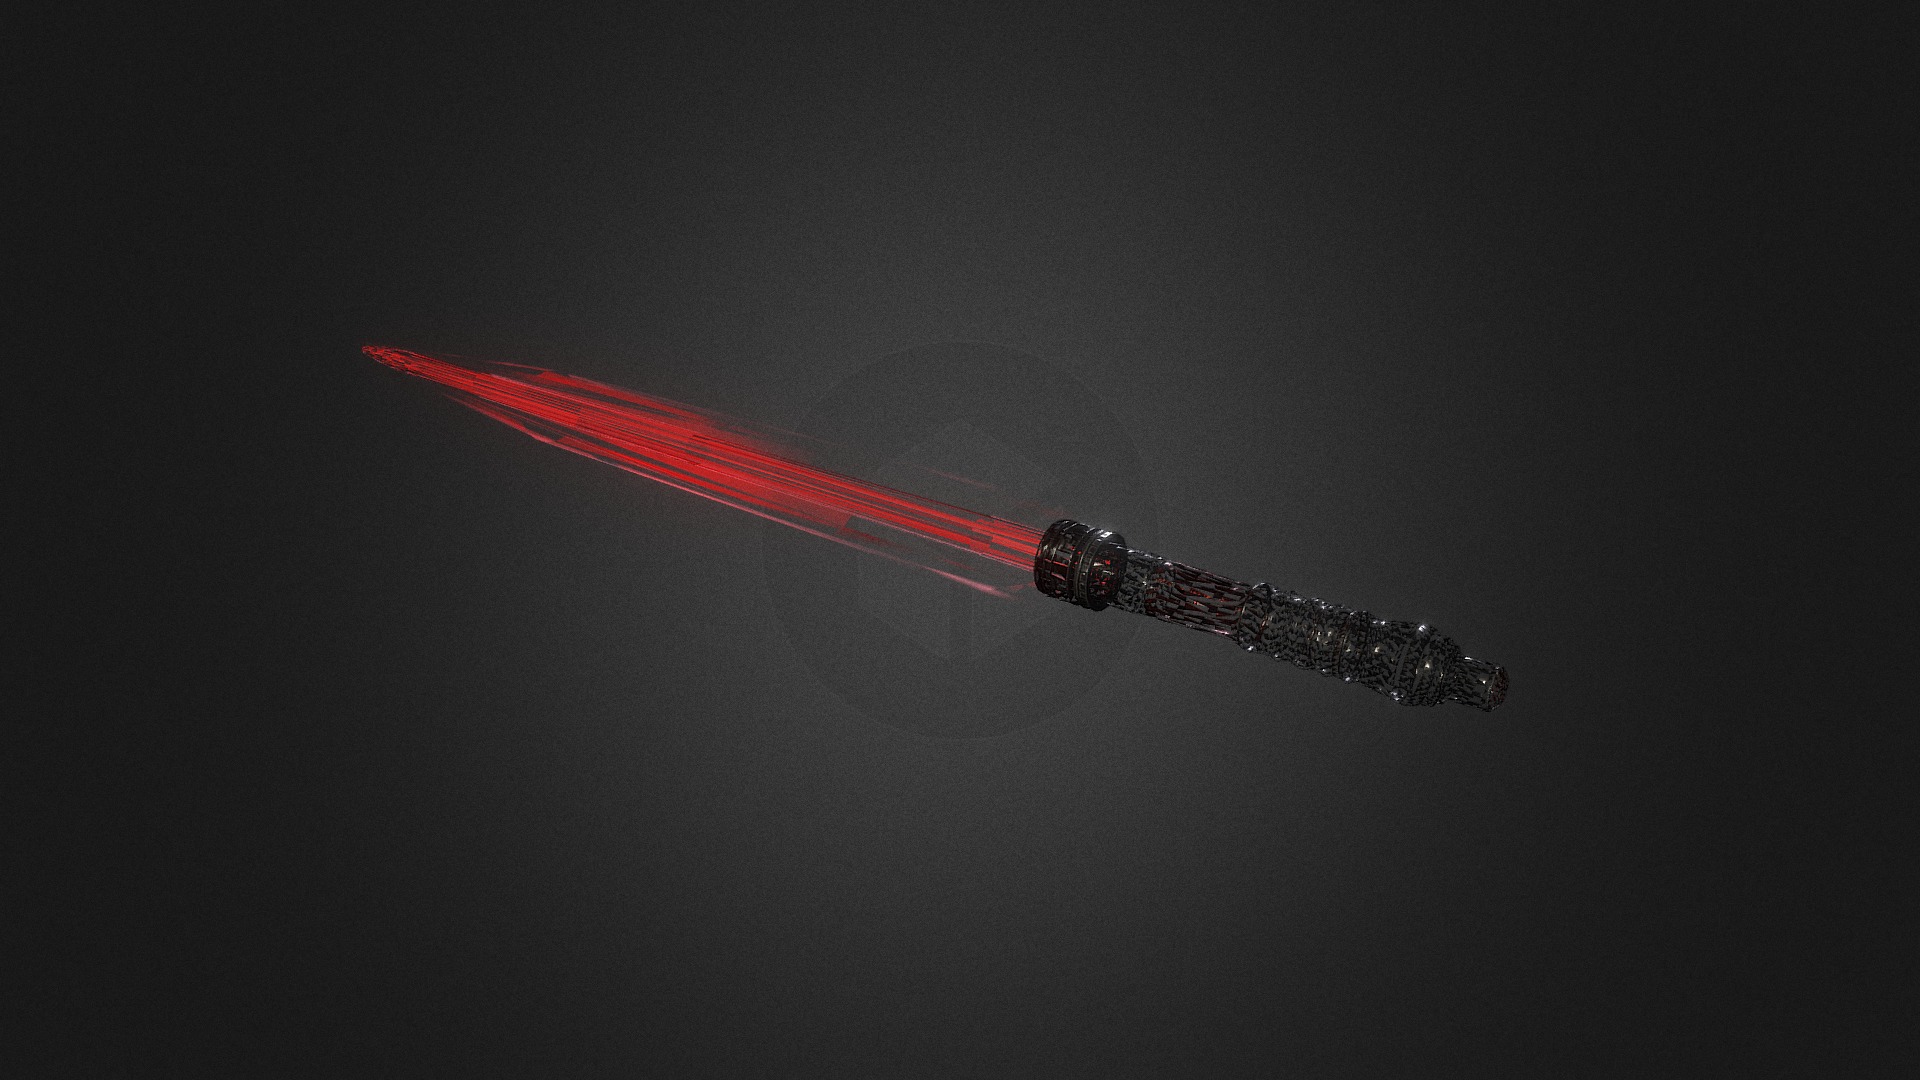 3D model Star Wars Sith Lightsaber Concept - This is a 3D model of the Star Wars Sith Lightsaber Concept. The 3D model is about a dragonfly flying in the sky.